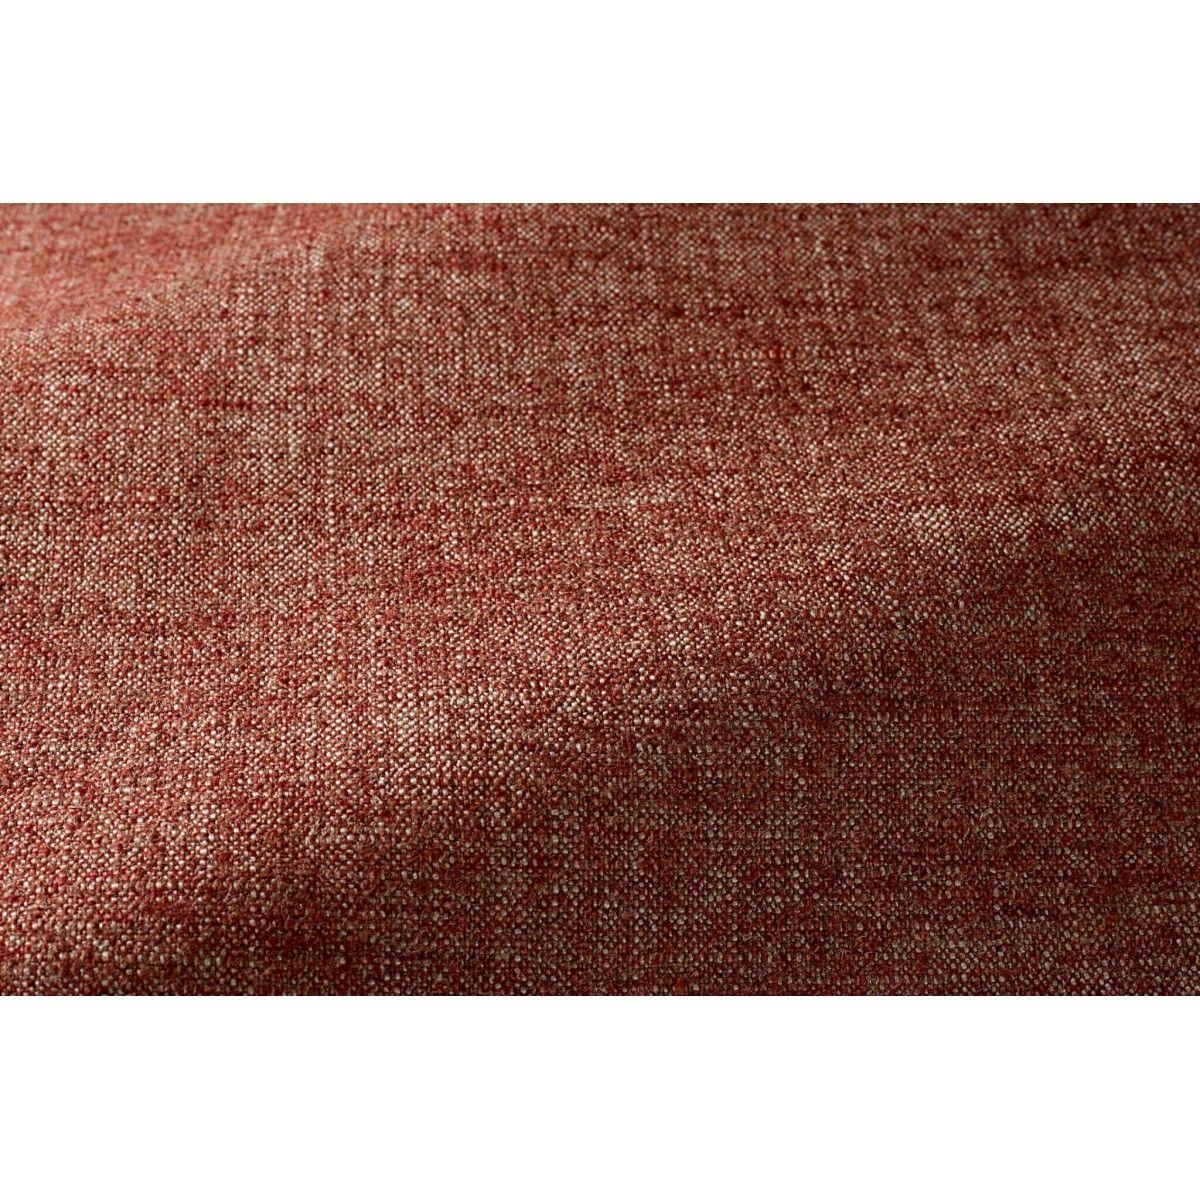 Popus Editions Giovanna 3 seater sofa in Marrakesh London Linen Fabric

Giovanna is a sofa with a strong profile. A sober, plush line, with this famous detail that changes everything, so as not to forget its strength of character and this charming